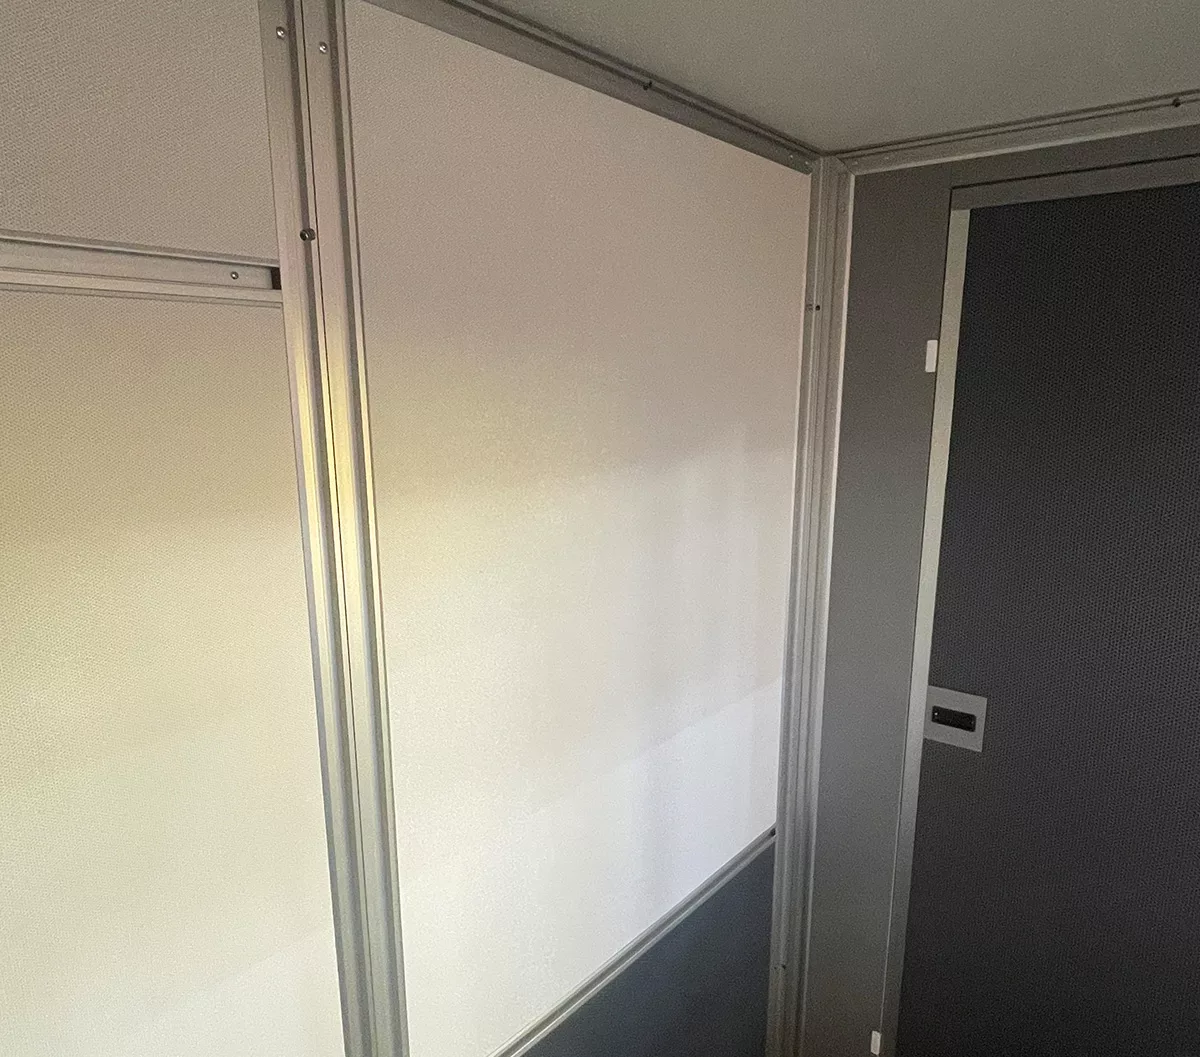 The interior walls of the new interpreting booth from Audipack are white and pleasant.